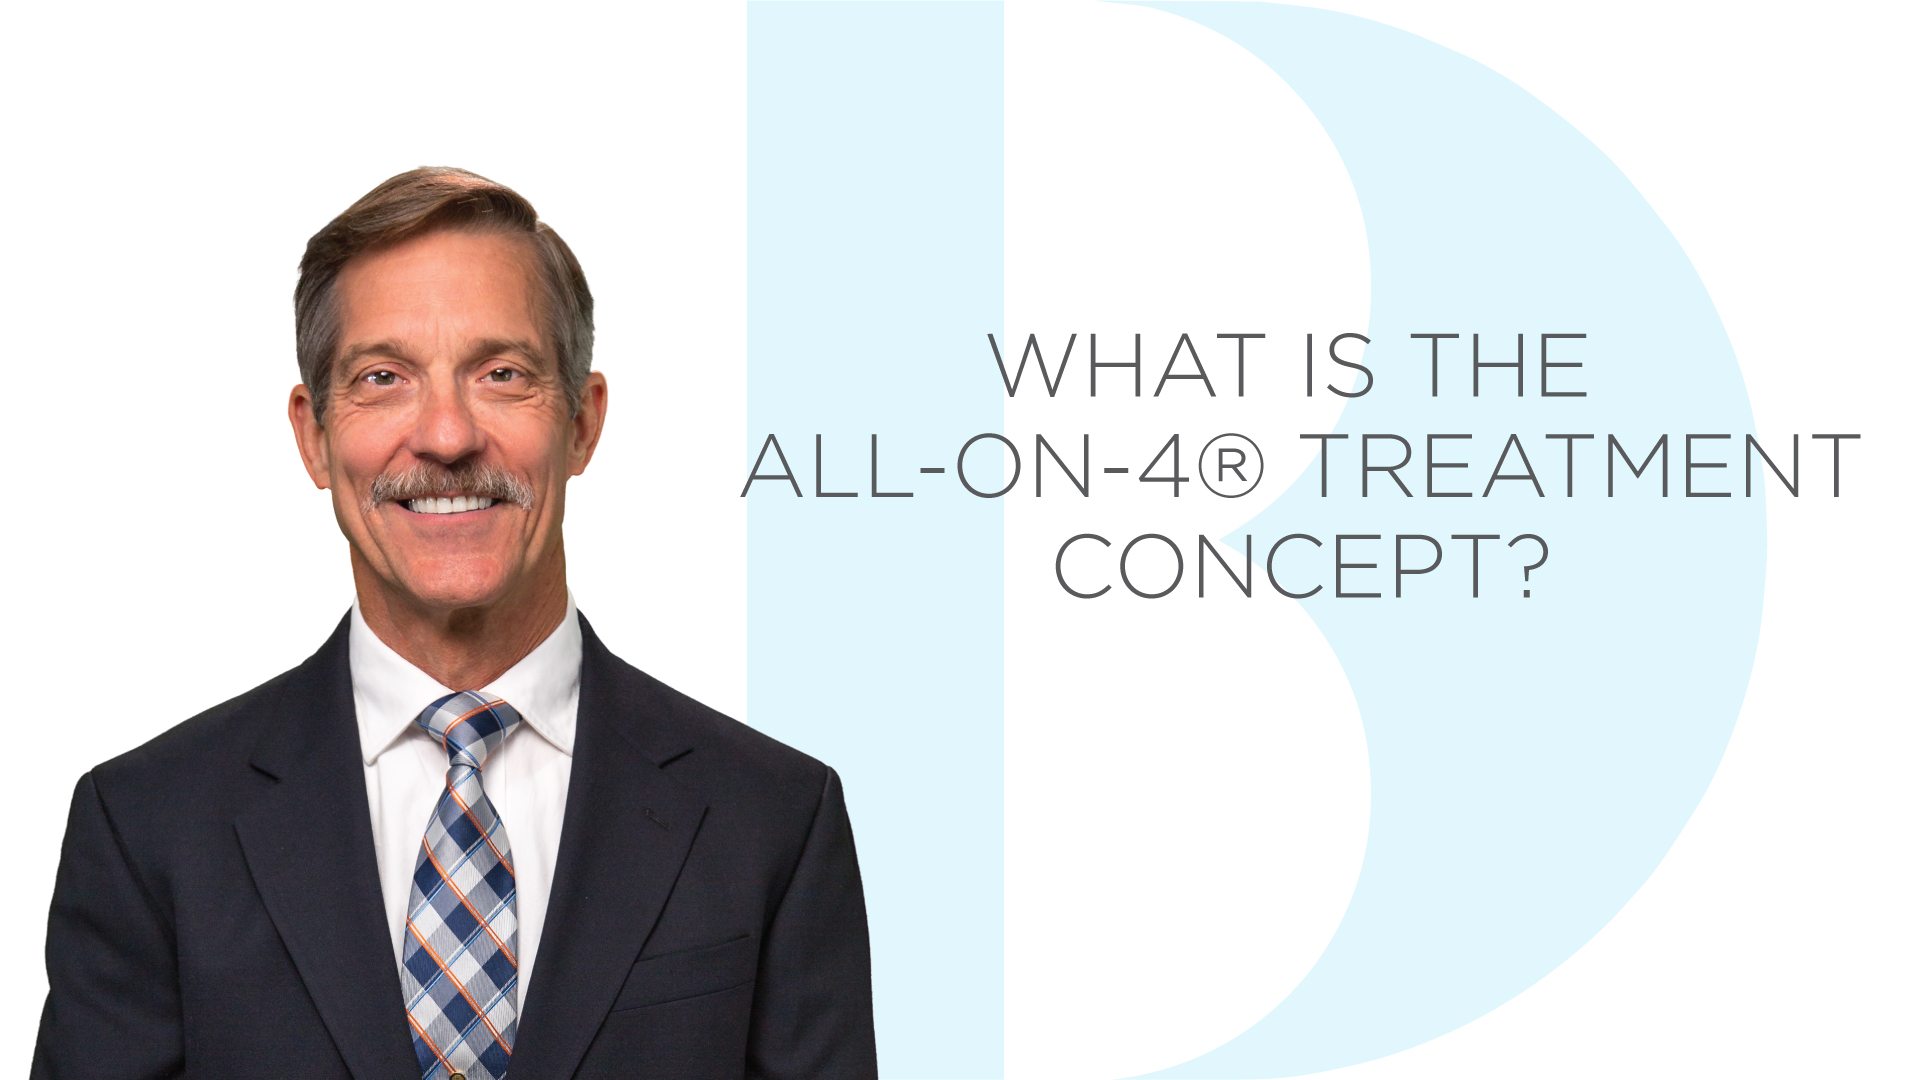 What Is the All-on-4® Treatment Concept?